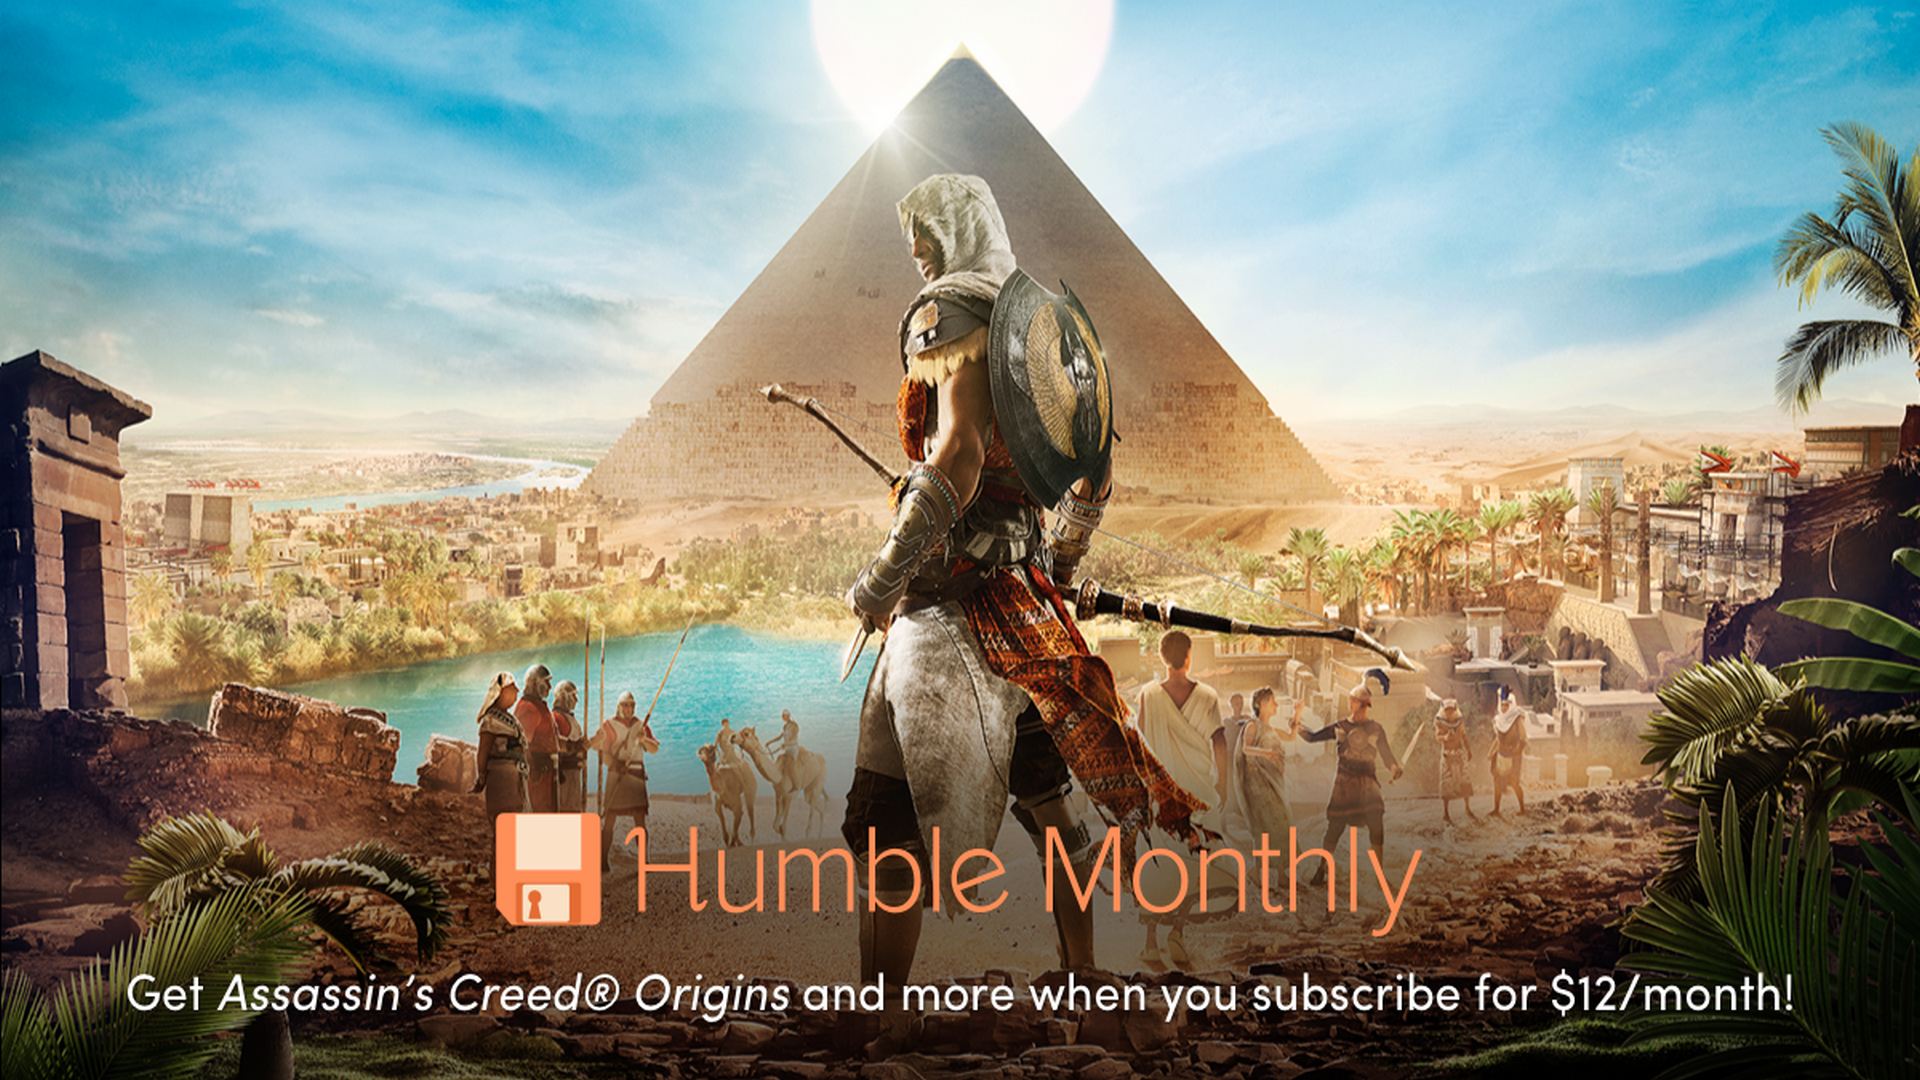 Humble monthly mai 2019